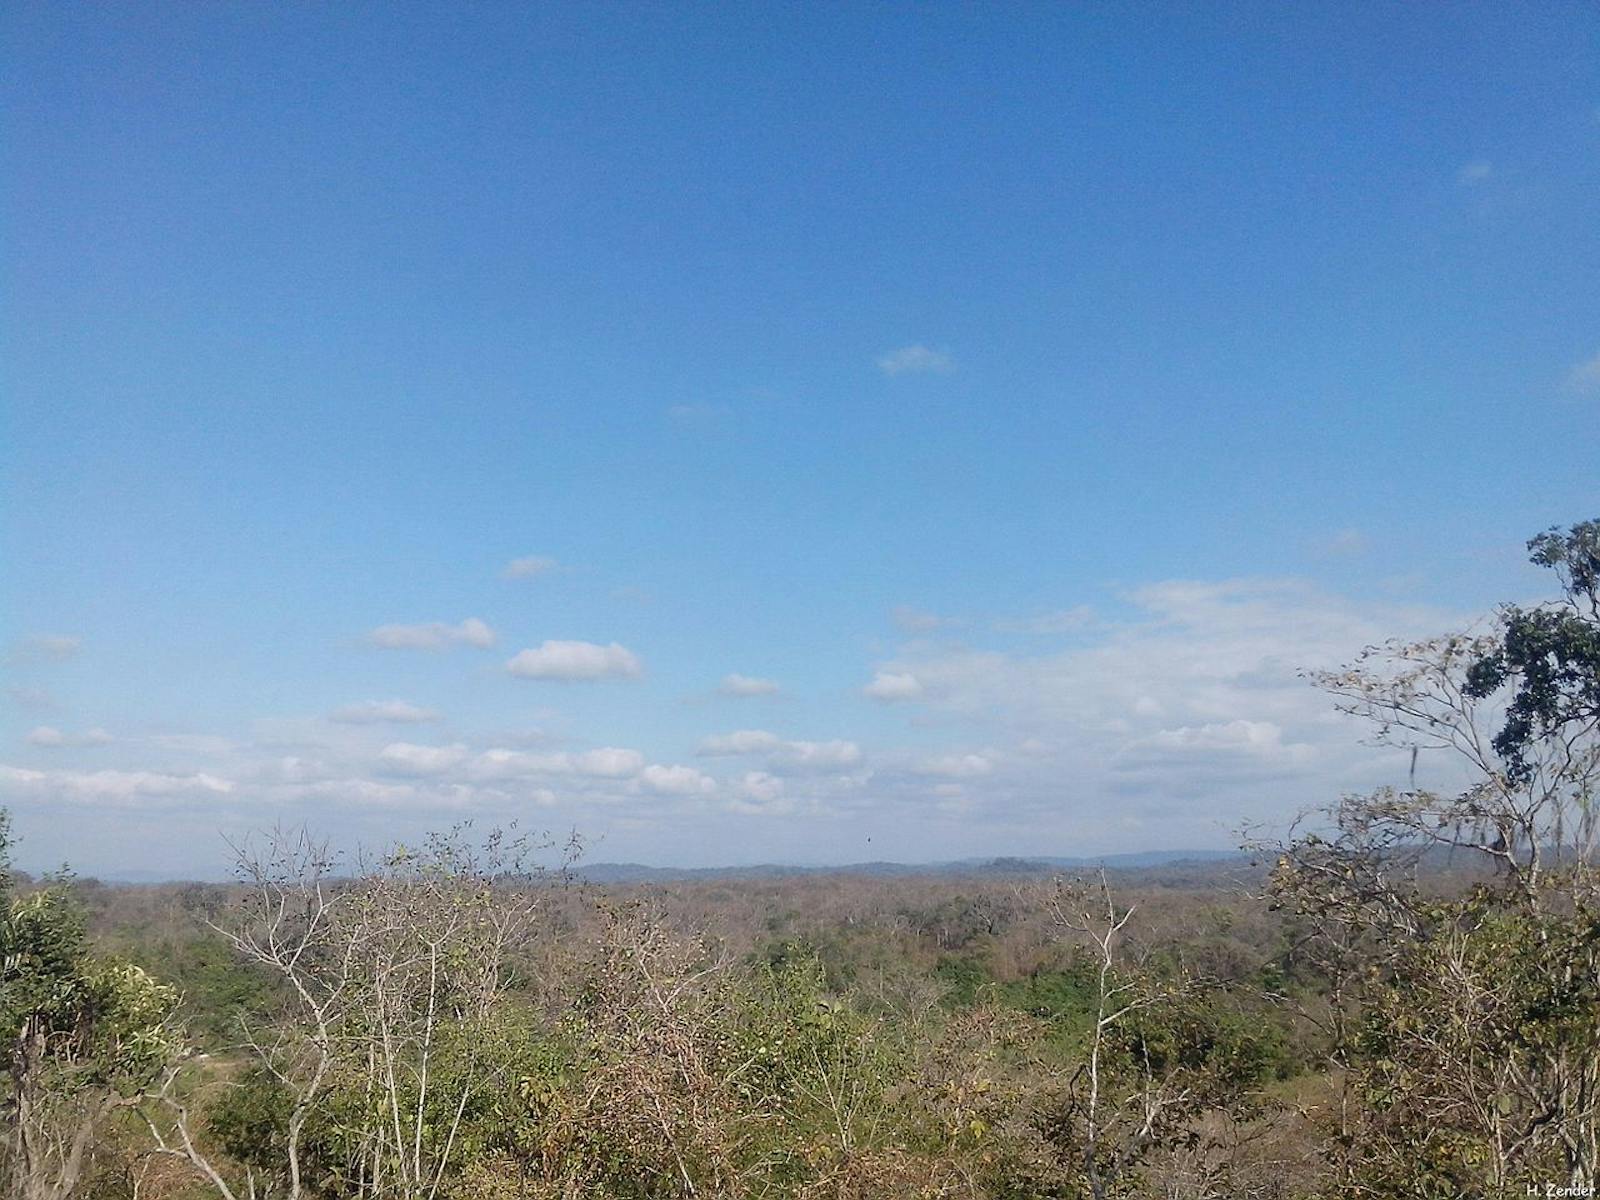 Tumbes-Piura Dry Forests